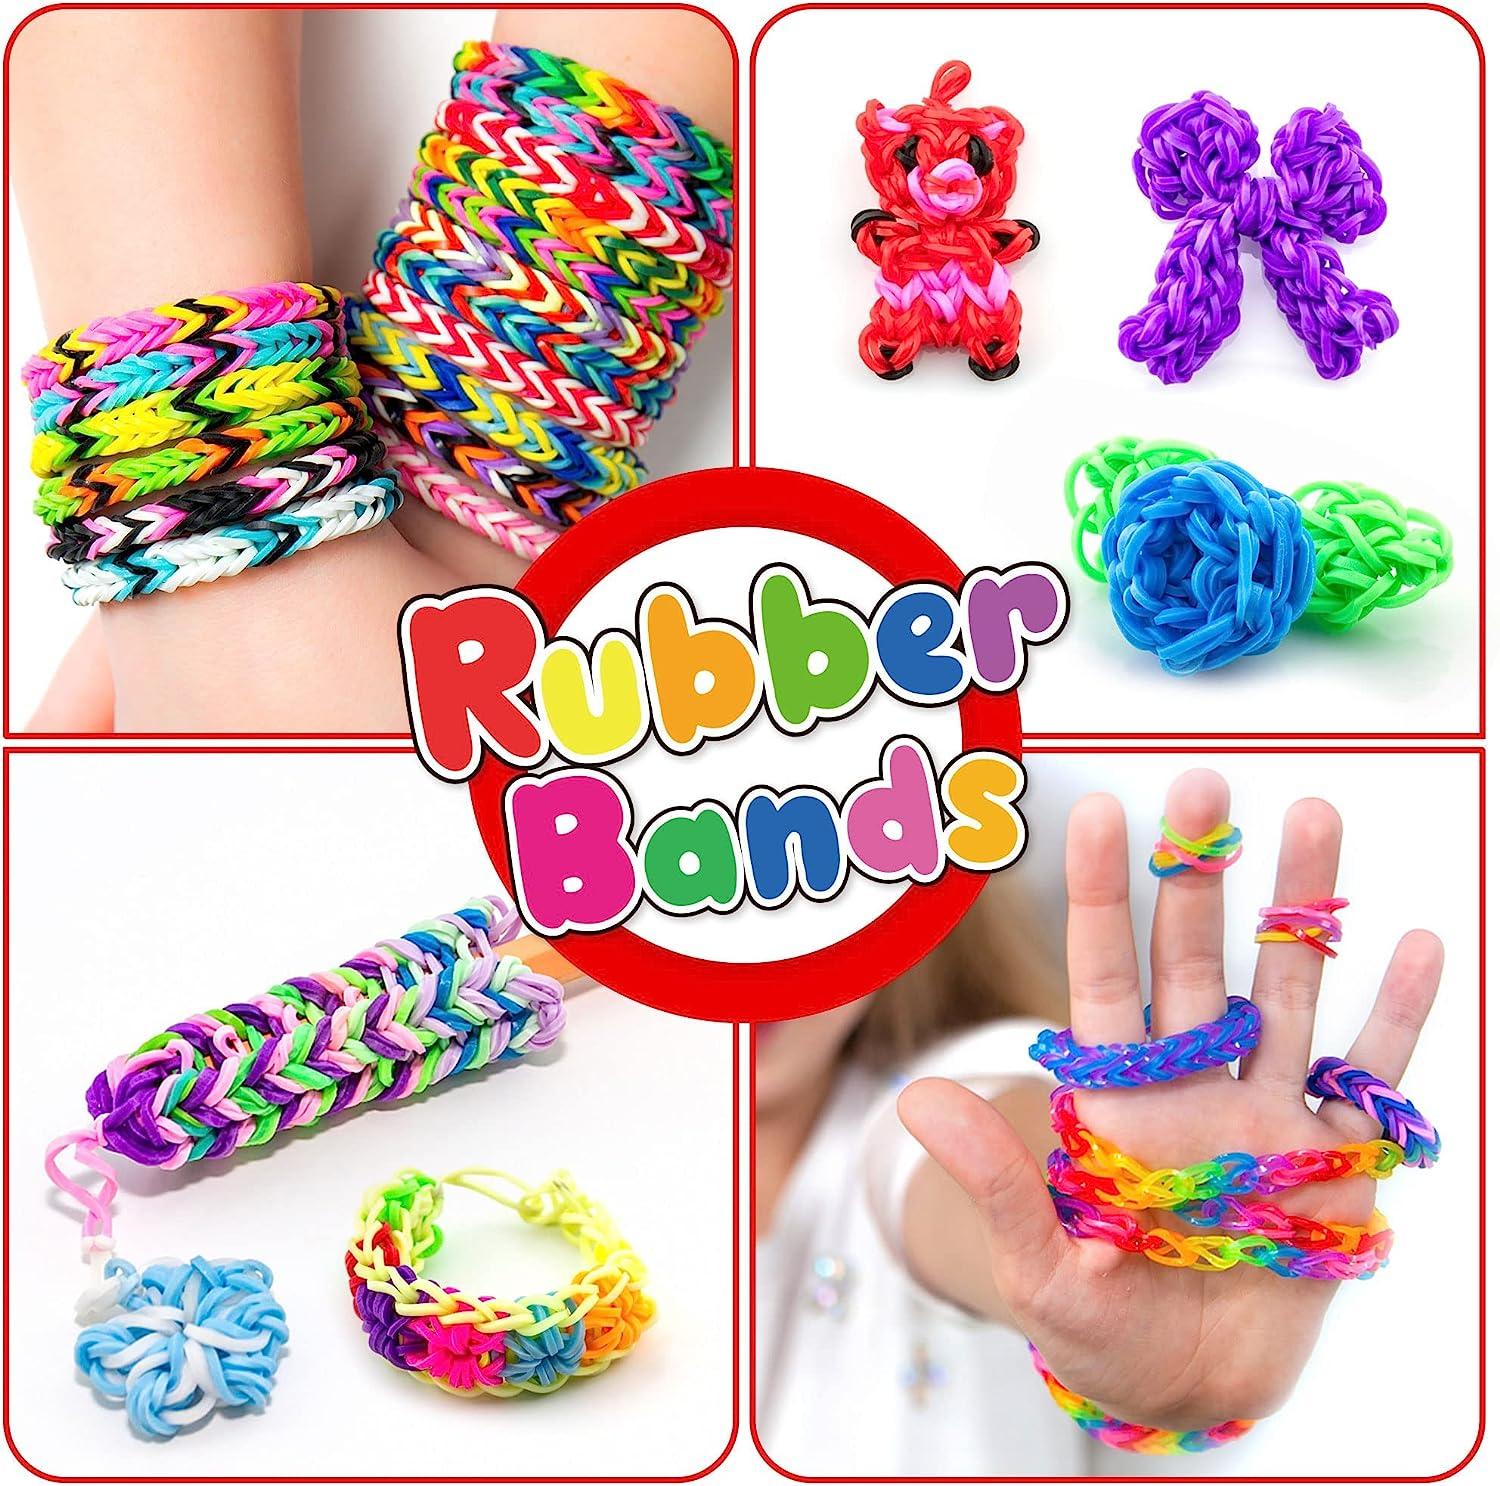 600/1500 Colored Rubber Band Bracelet Making Kit Rubber Band